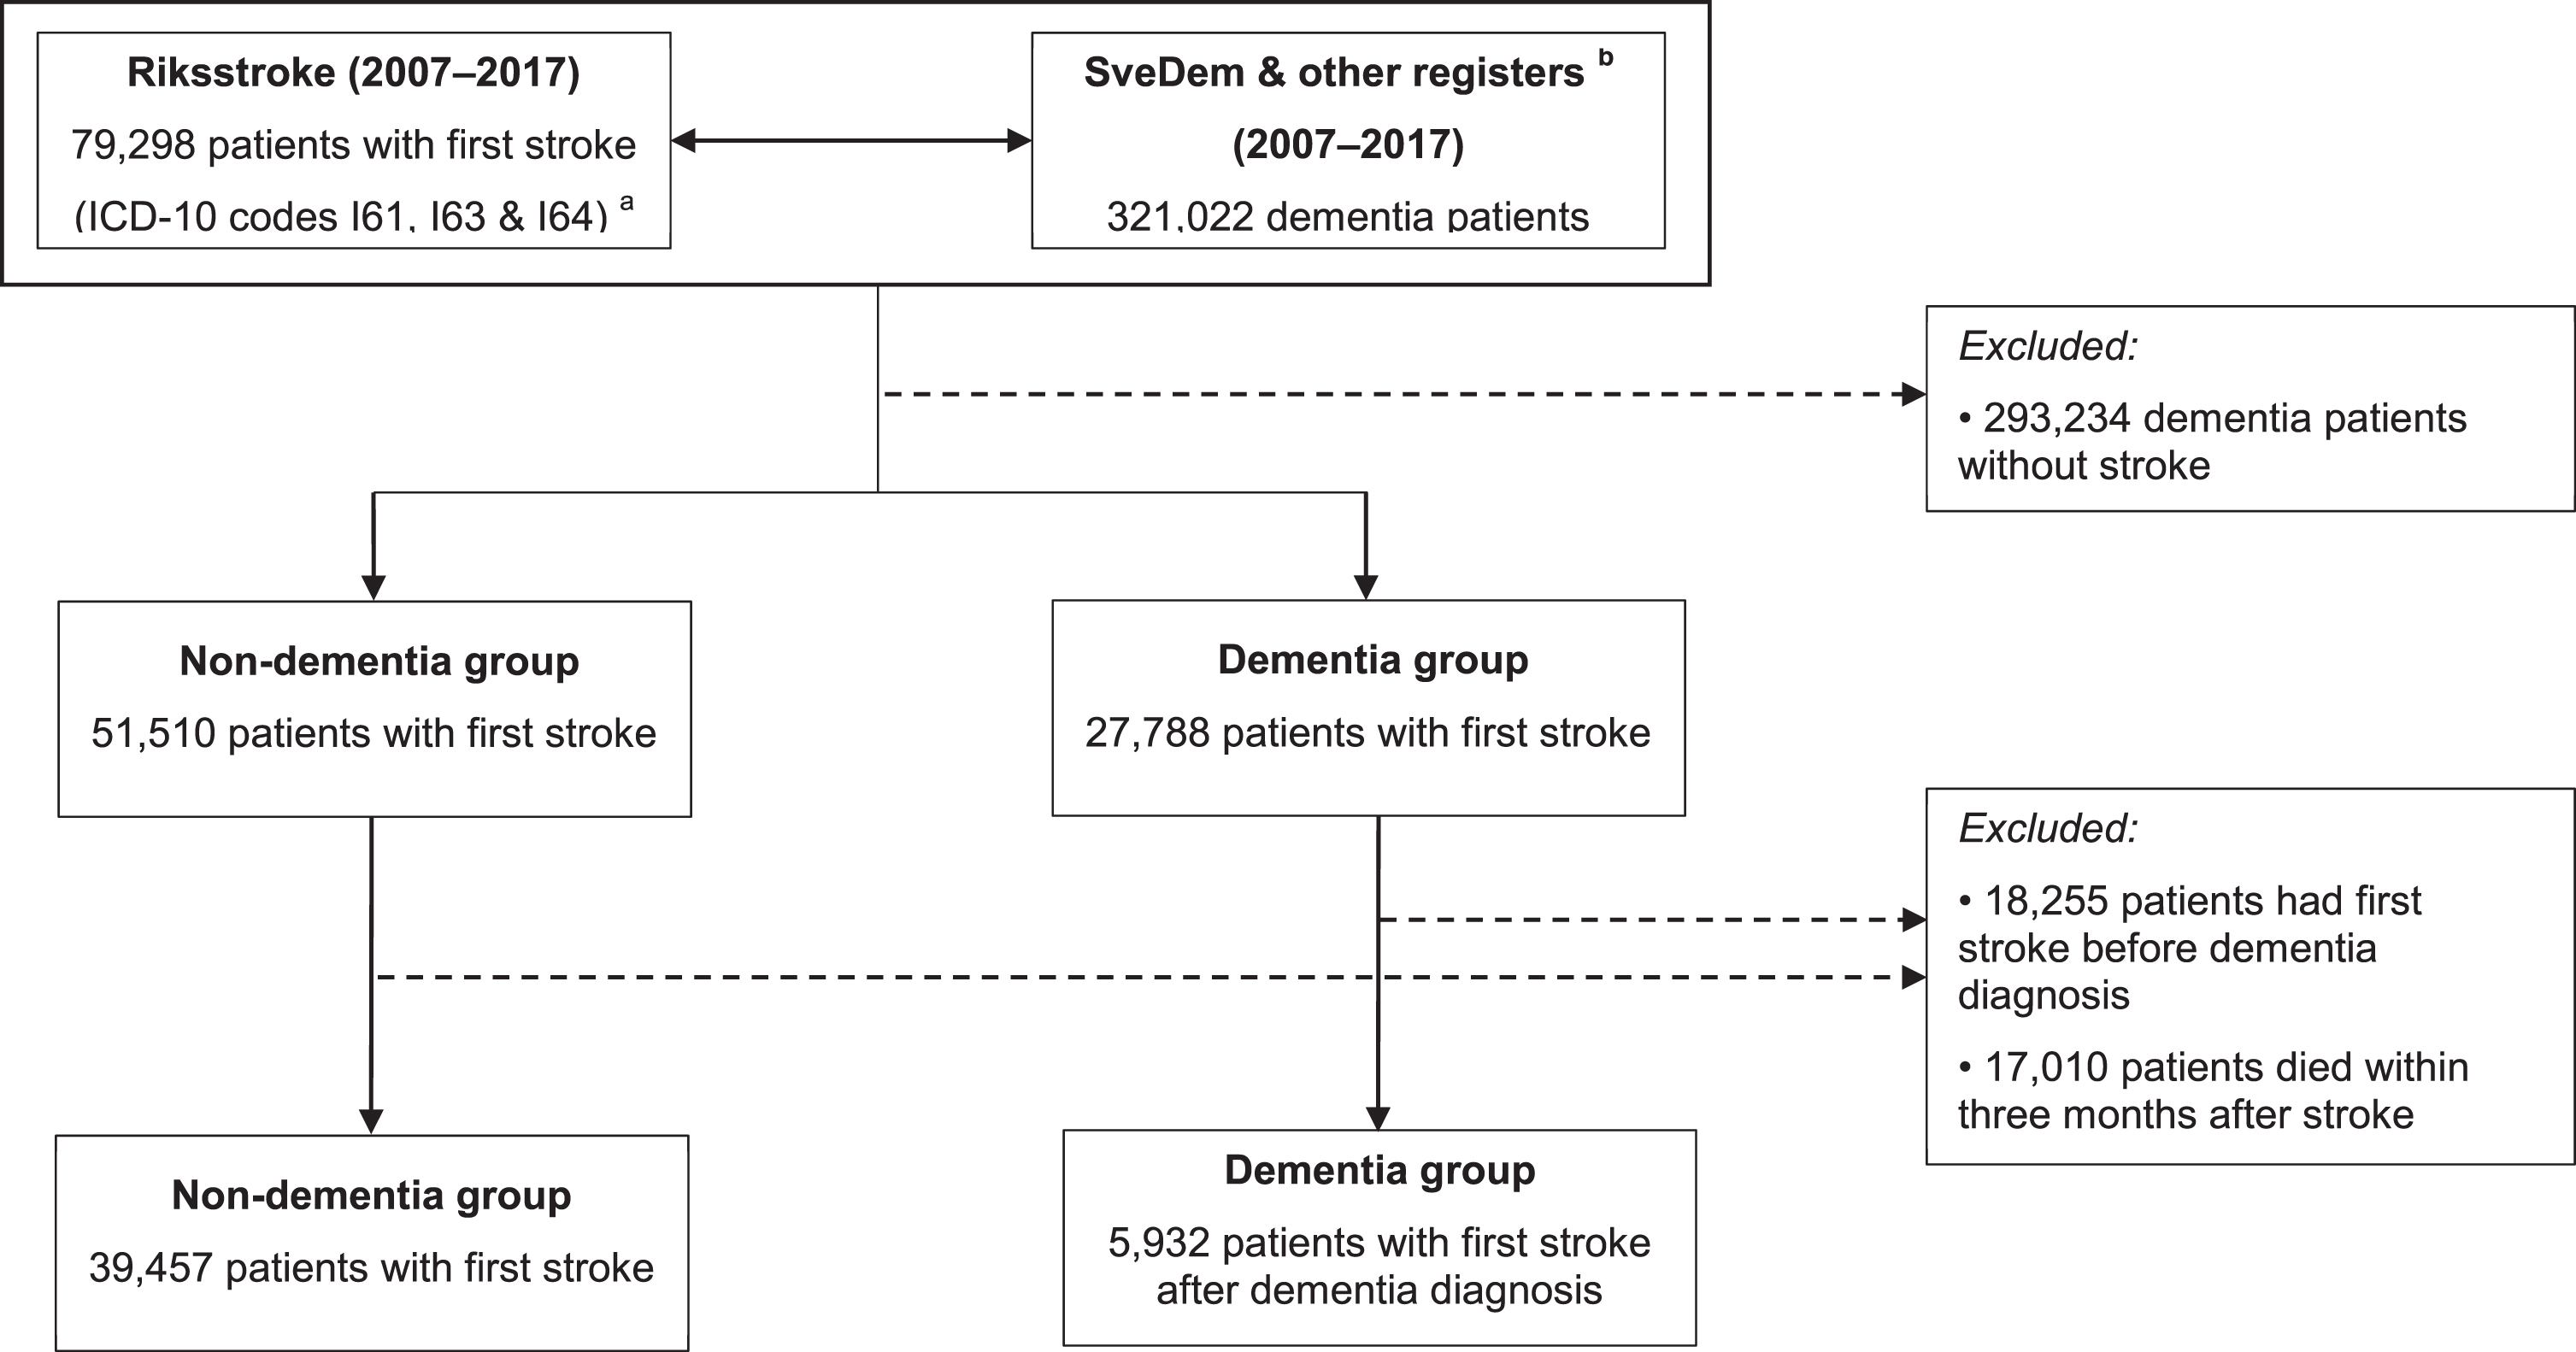 Patient selection process.a International Classification of Diseases, Tenth Revision codes. I61: hemorrhage stroke. I63: ischemic stroke. I64: unspecified stroke.b Dementia patients were identified from the Swedish Dementia Register (SveDem), the National Patient Register and the Swedish Prescribed Drug Register.